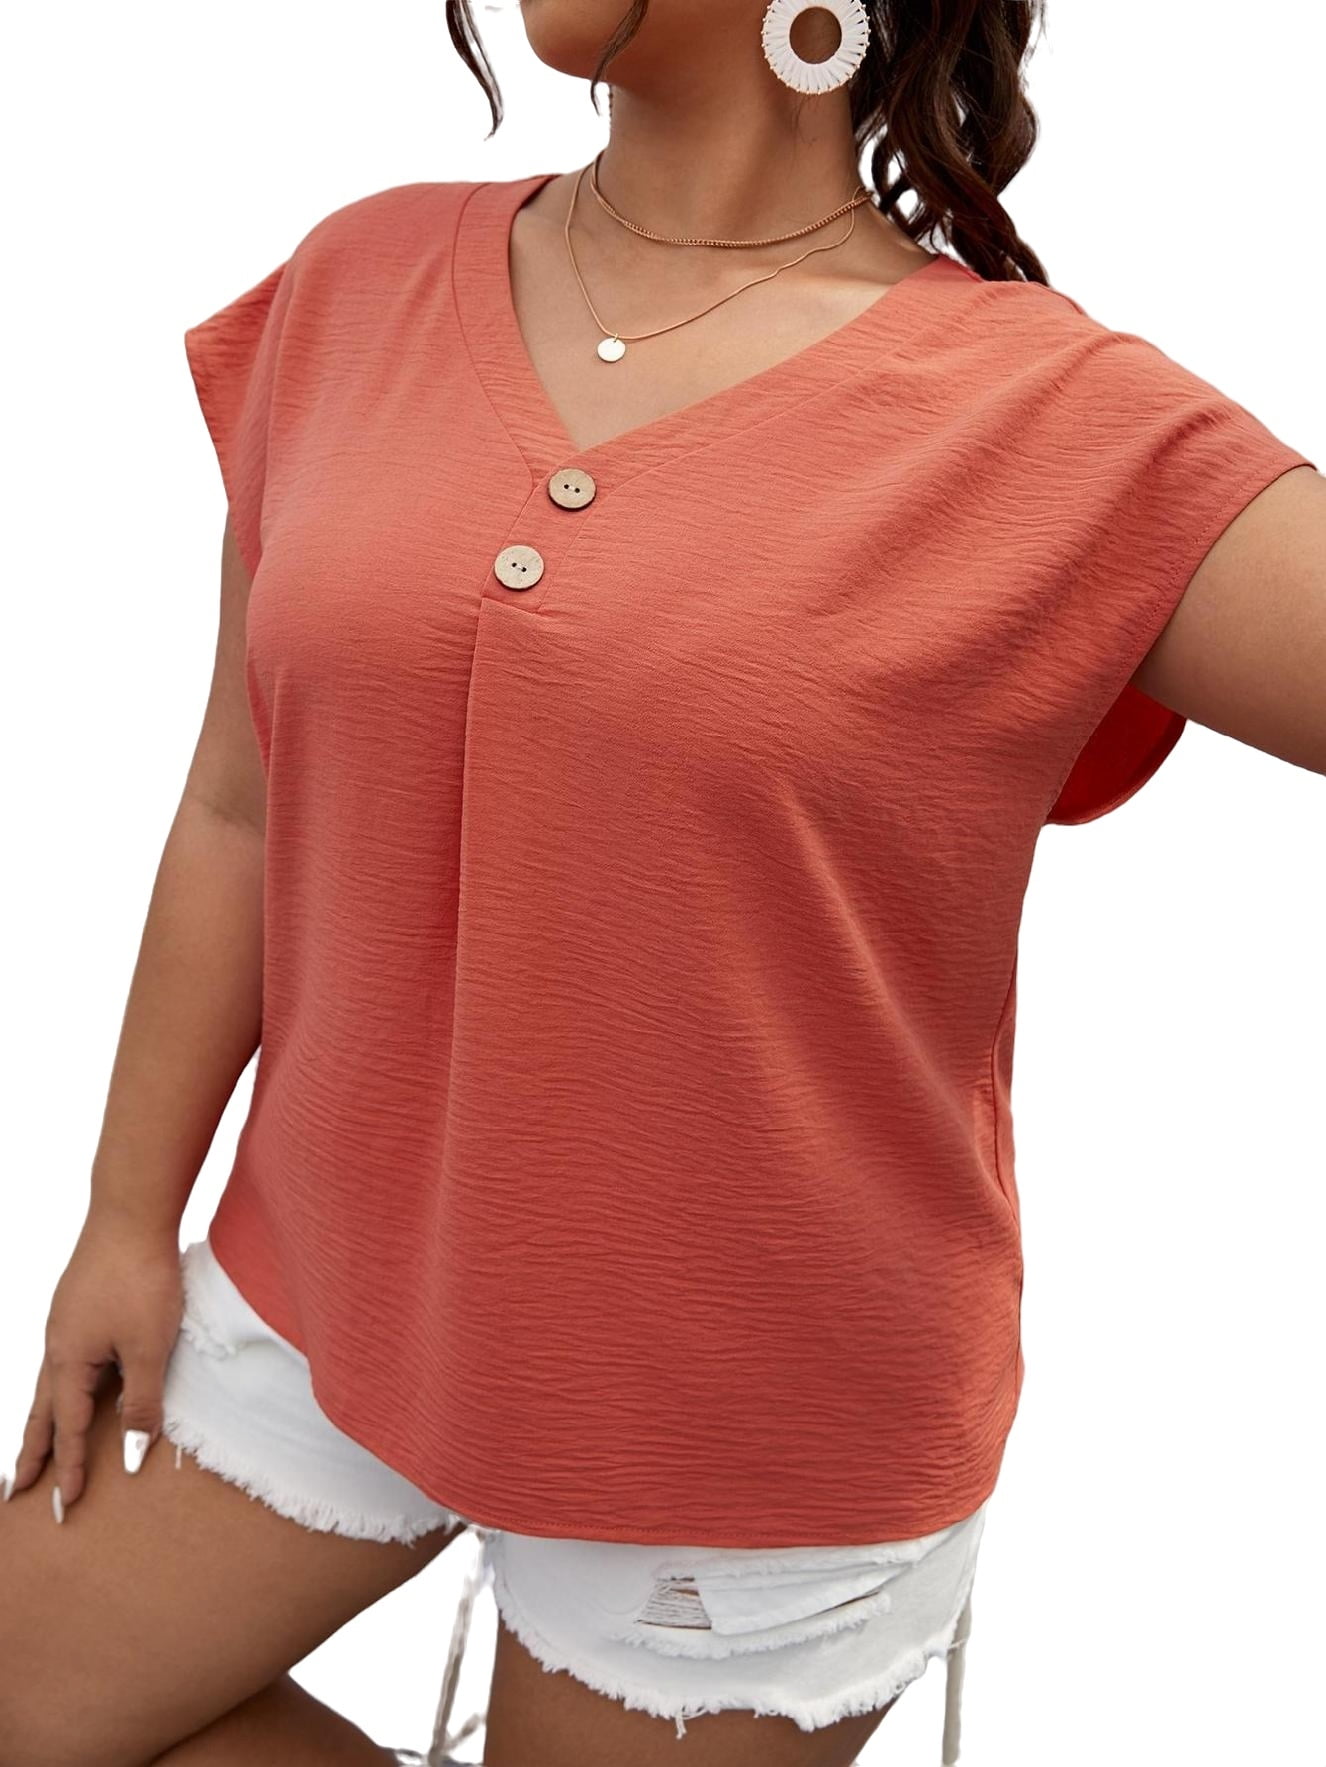 Casual V Neck Top Short Sleeve Red Plus Size Blouses (Women's